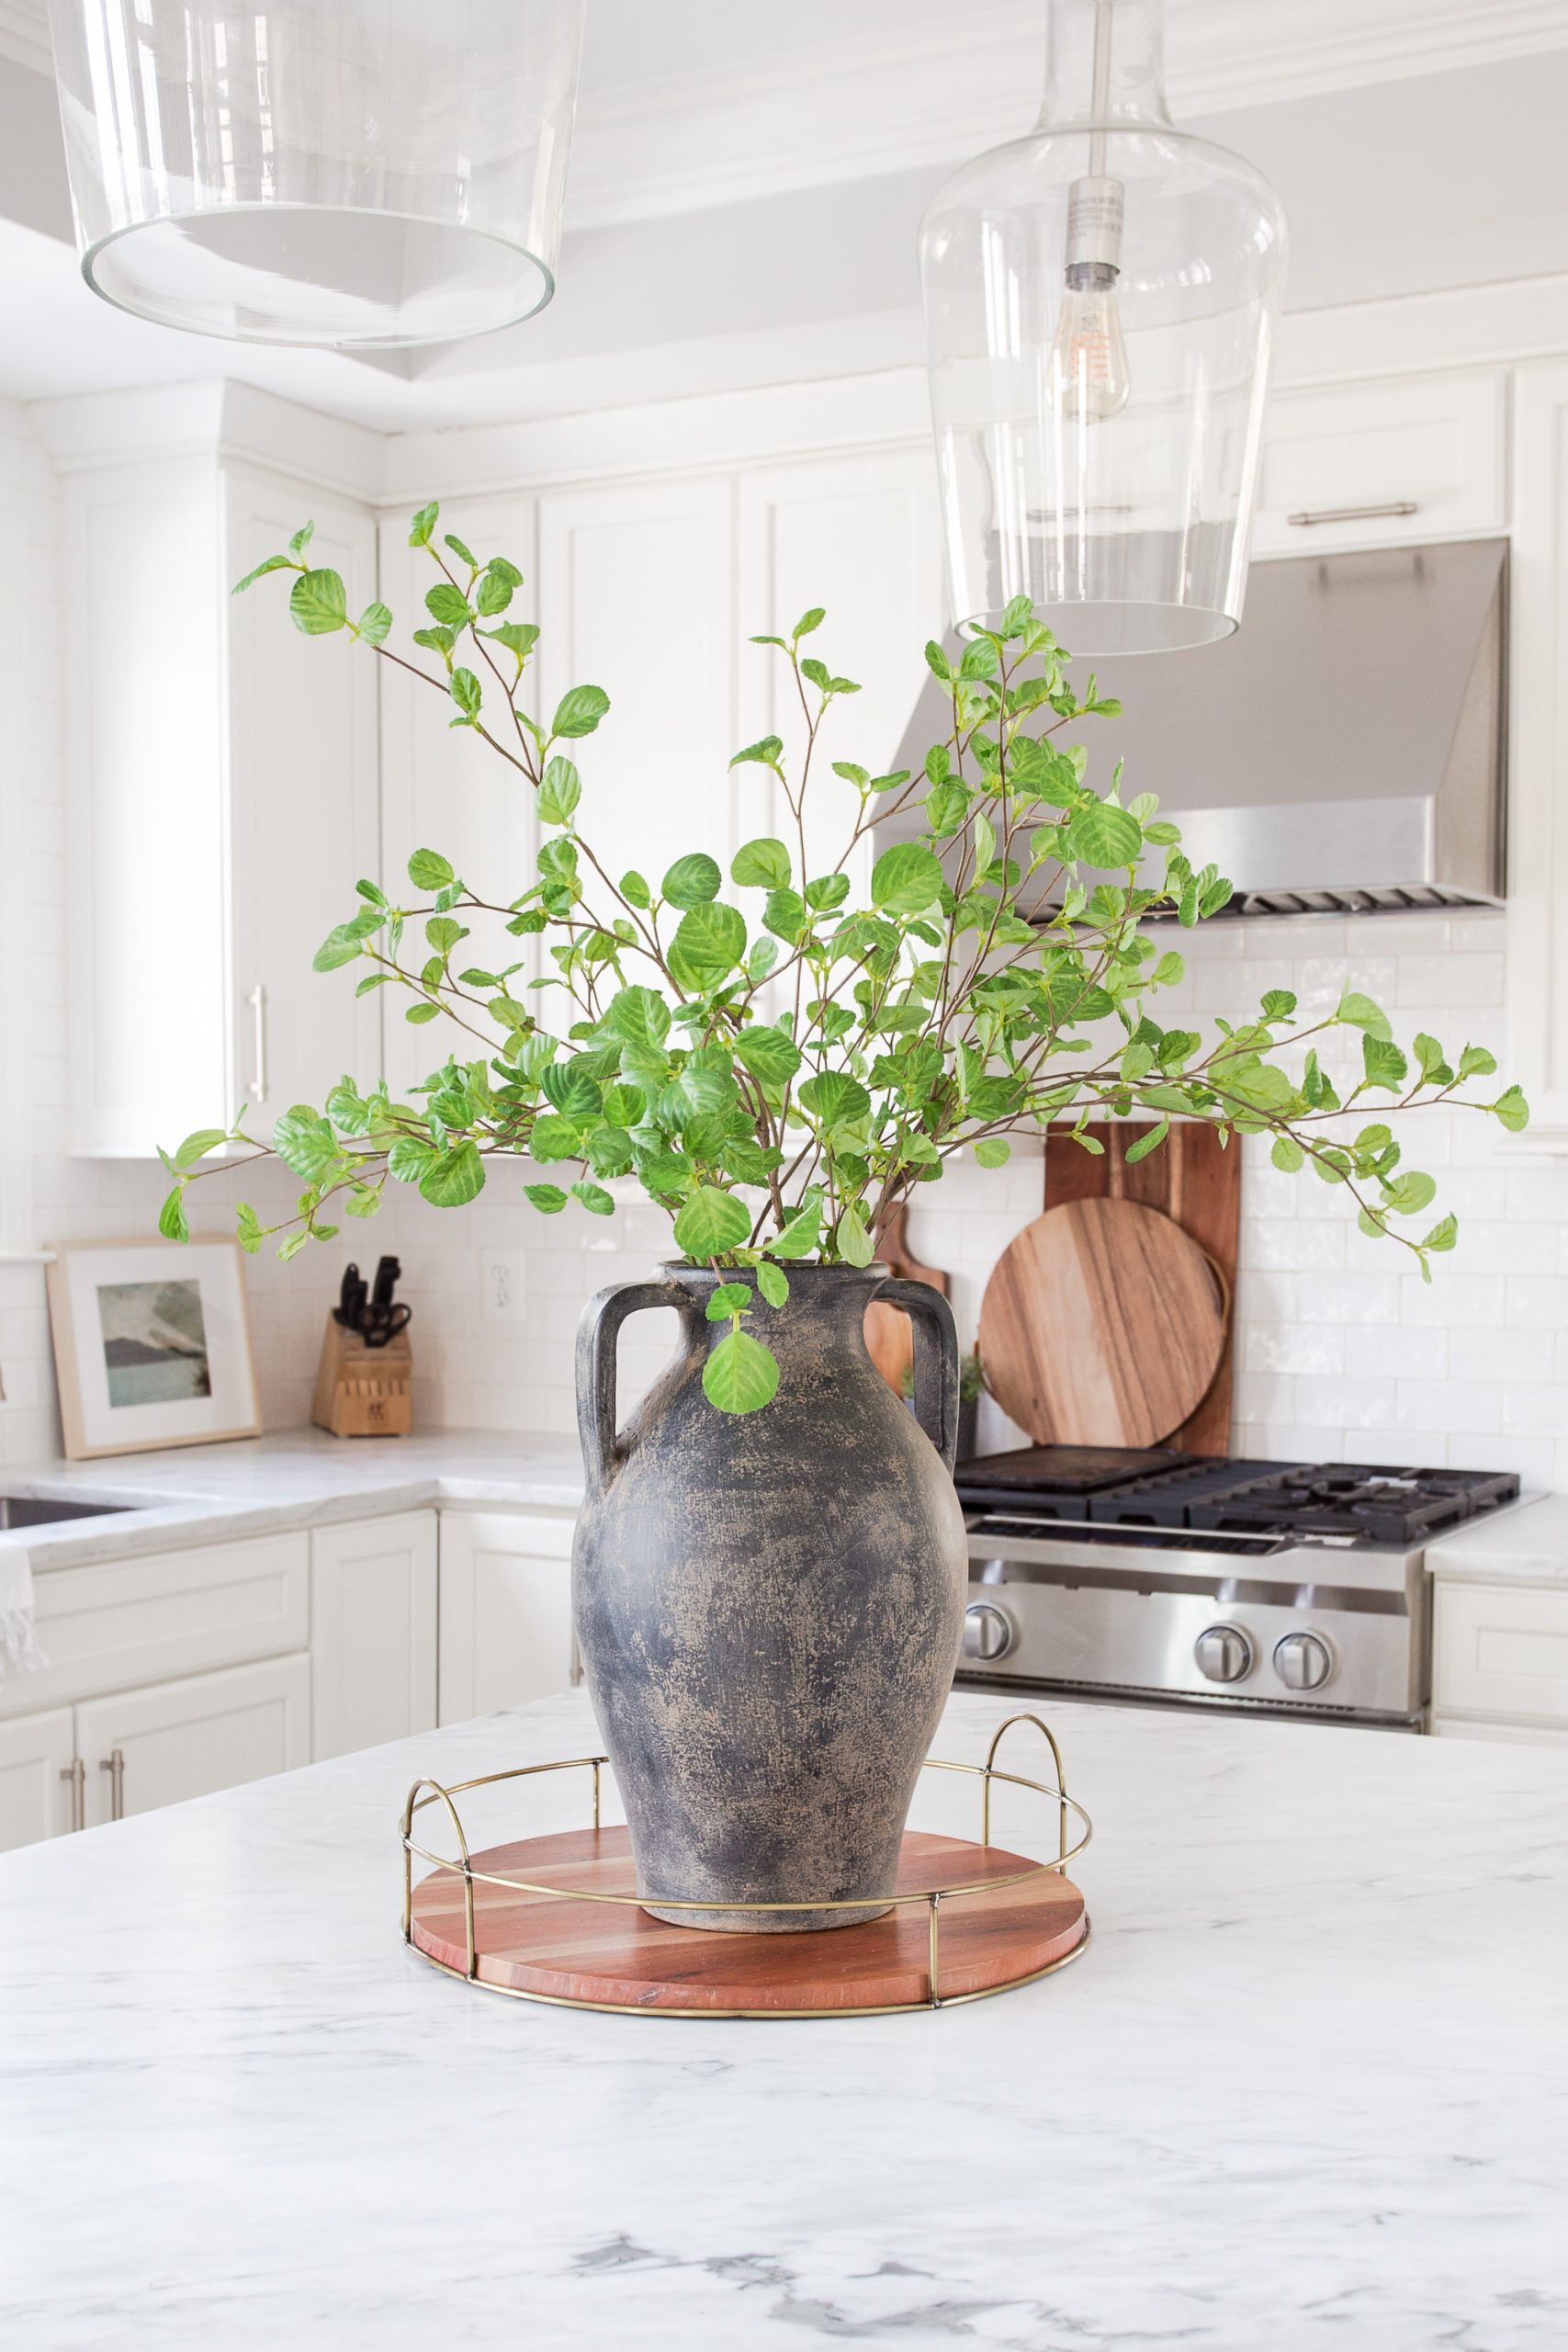 black vintage vase with greenery sitting on kitchen marble countertop